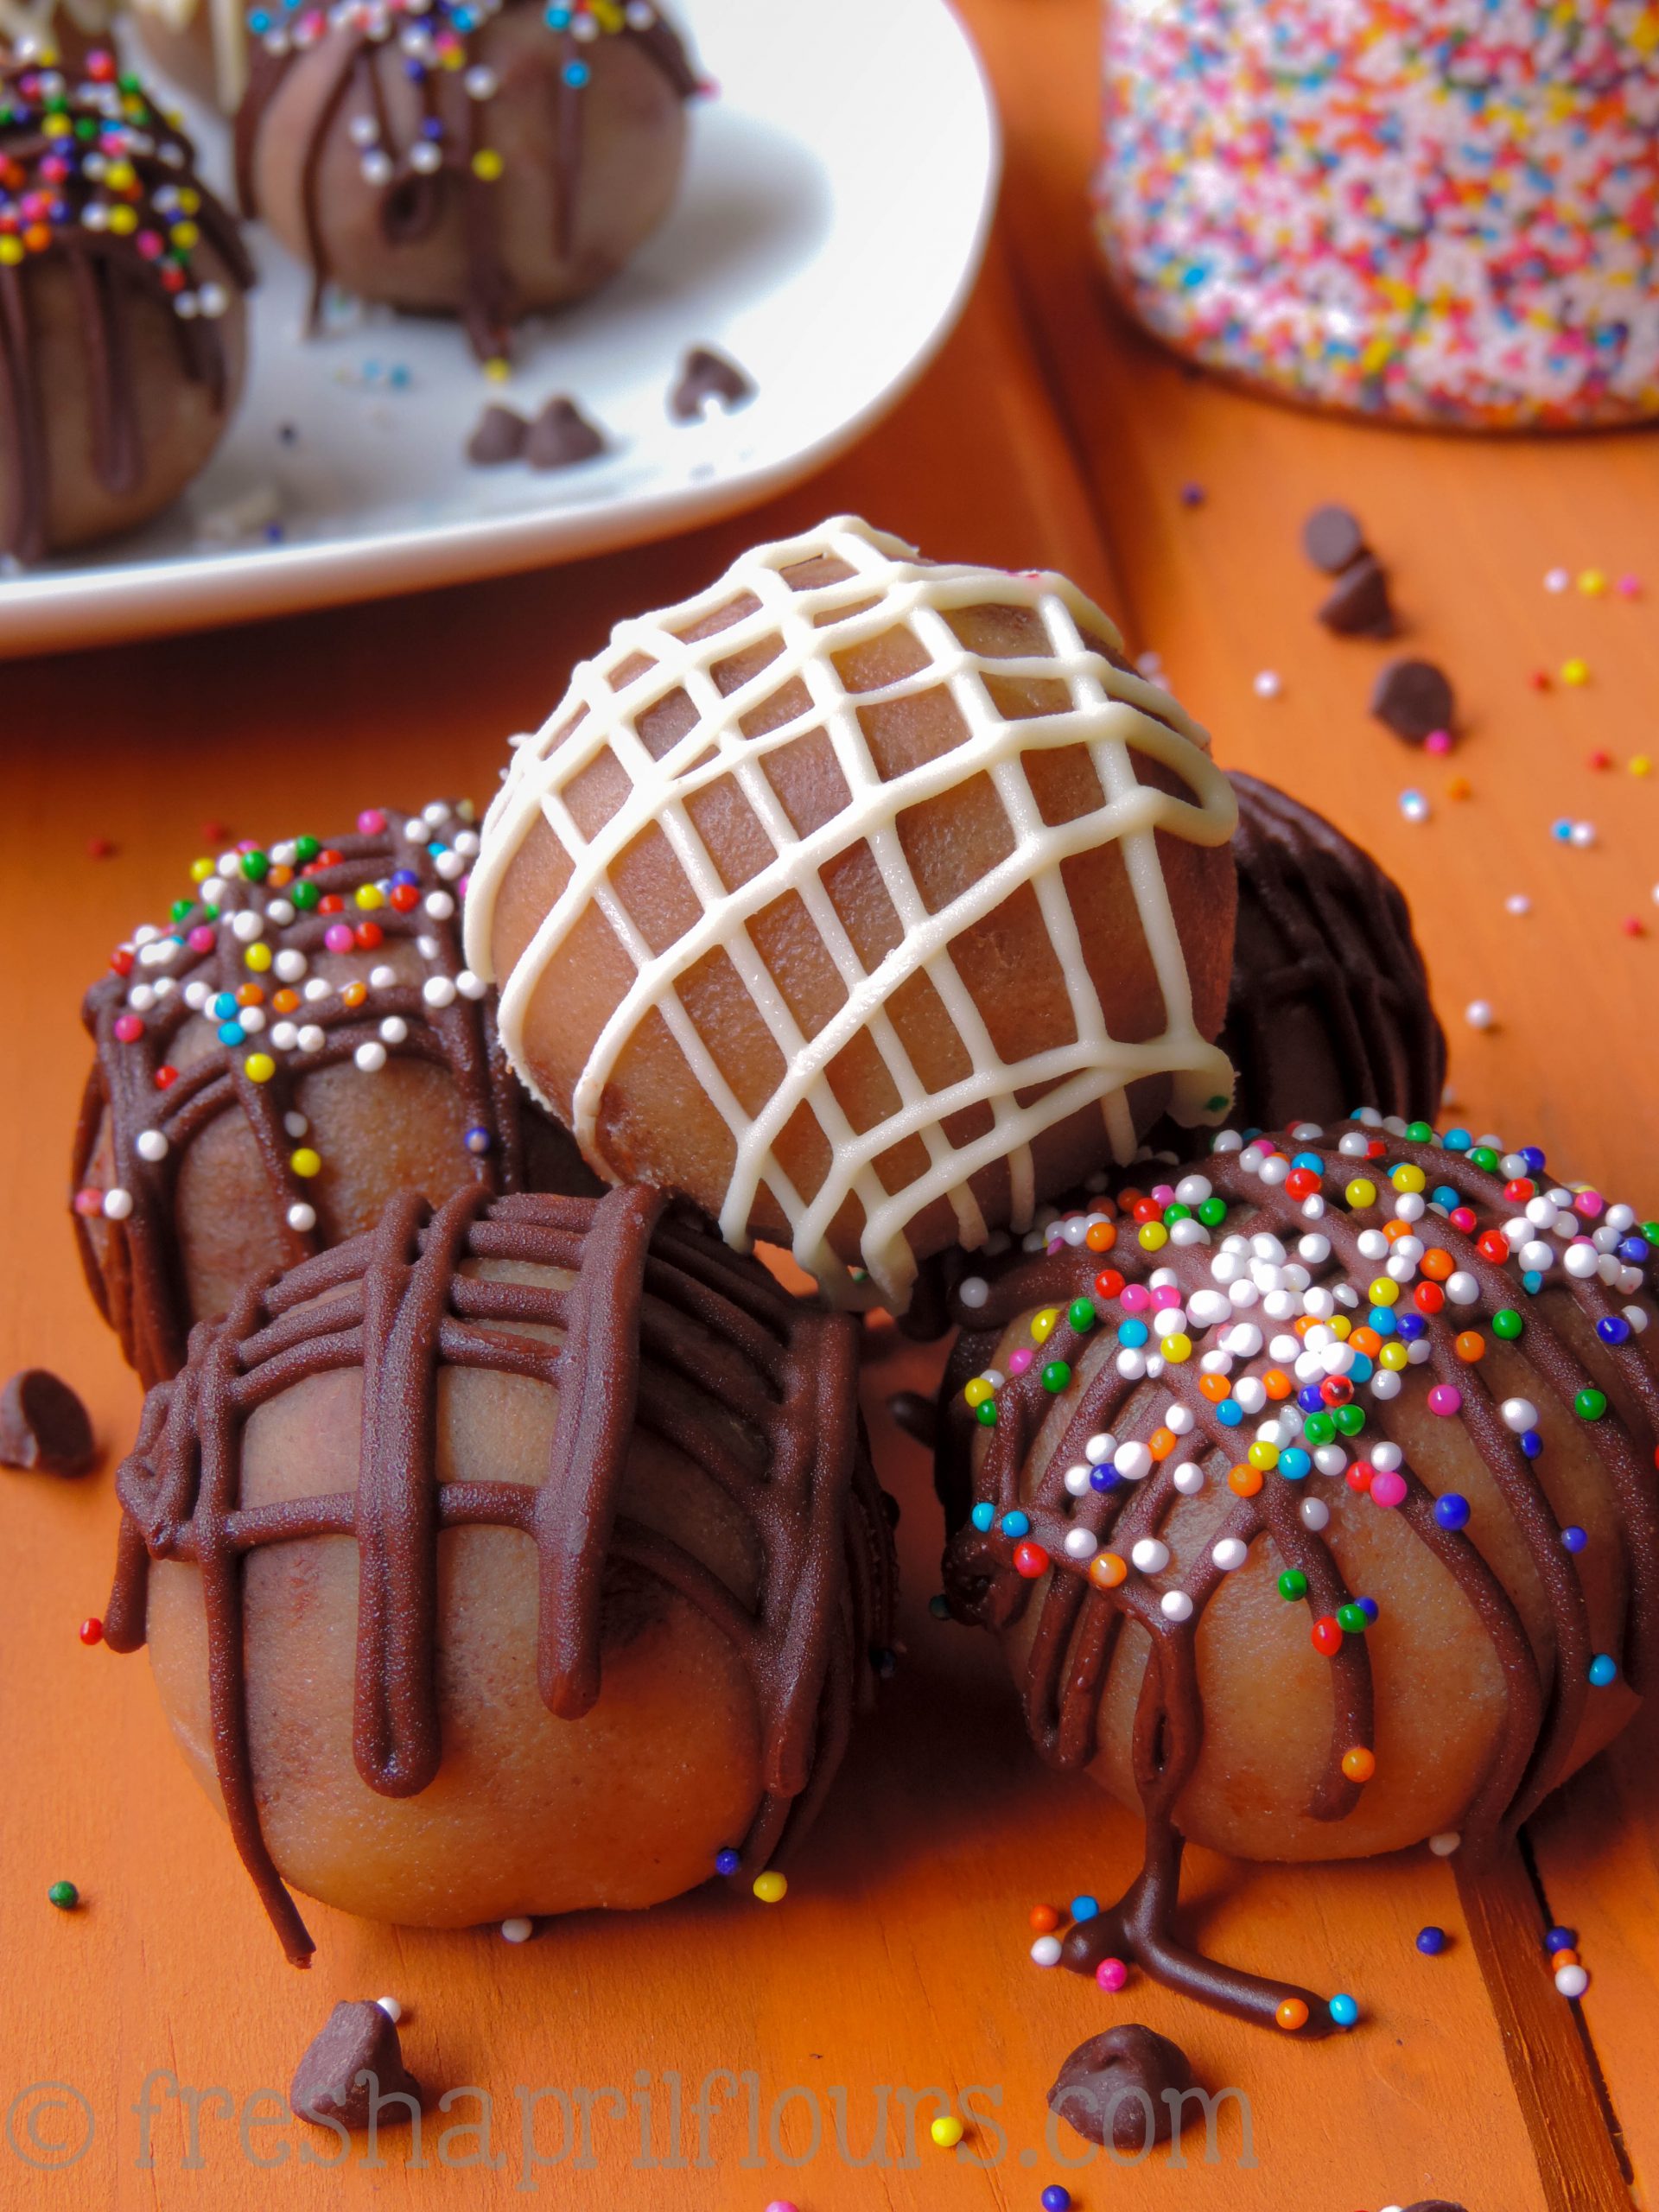 pile of cookie dough bites with sprinkles and chocolate decorating them